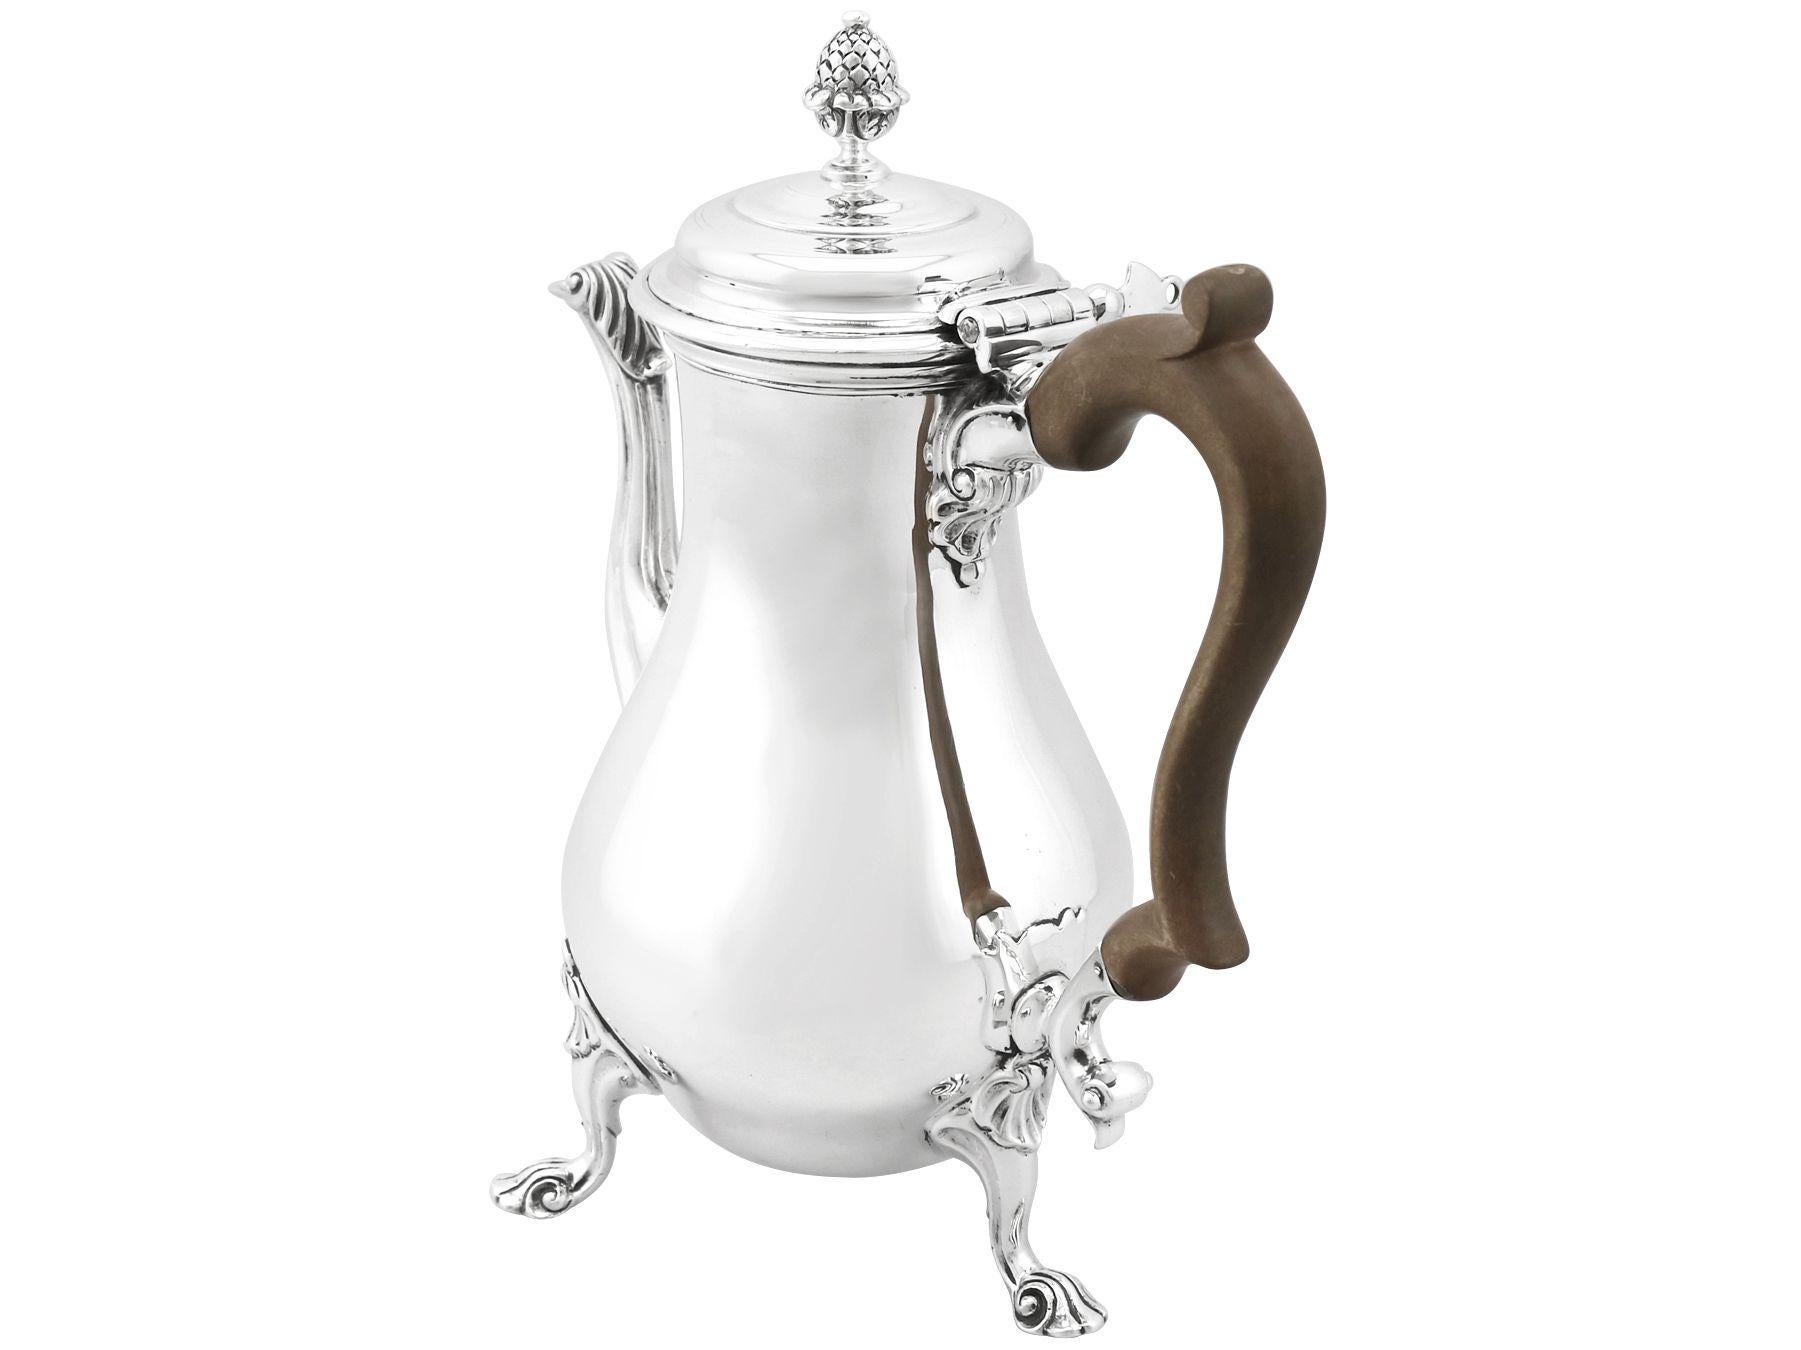 Antique George II Style Sterling Silver Café Au Lait Set In Excellent Condition For Sale In Jesmond, Newcastle Upon Tyne